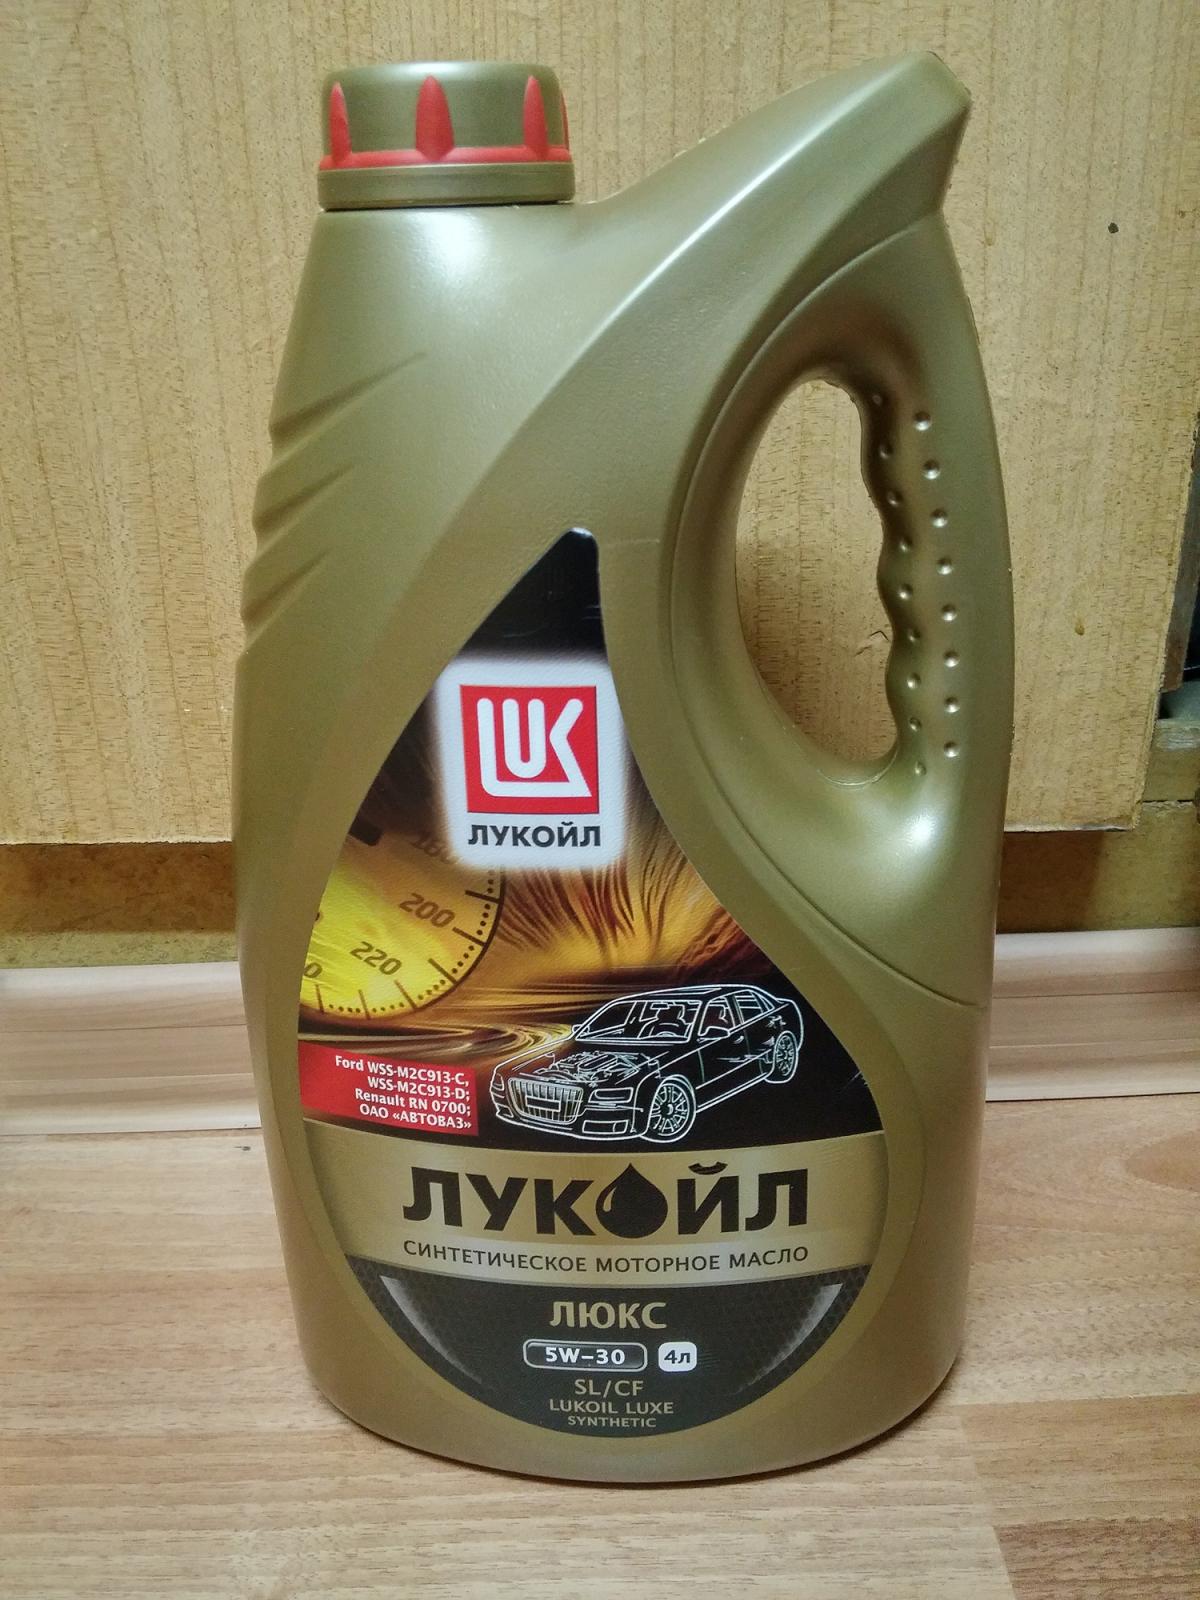 Масло лукойл 5w30 4л. Lukoil Luxe 5w-30. Лукойл Люкс 5w30 синтетика. Масло моторное Лукойл Люкс 5w-30 SL/CF синт. 4л. Лукойл Люкс 5w30 a5/b5.